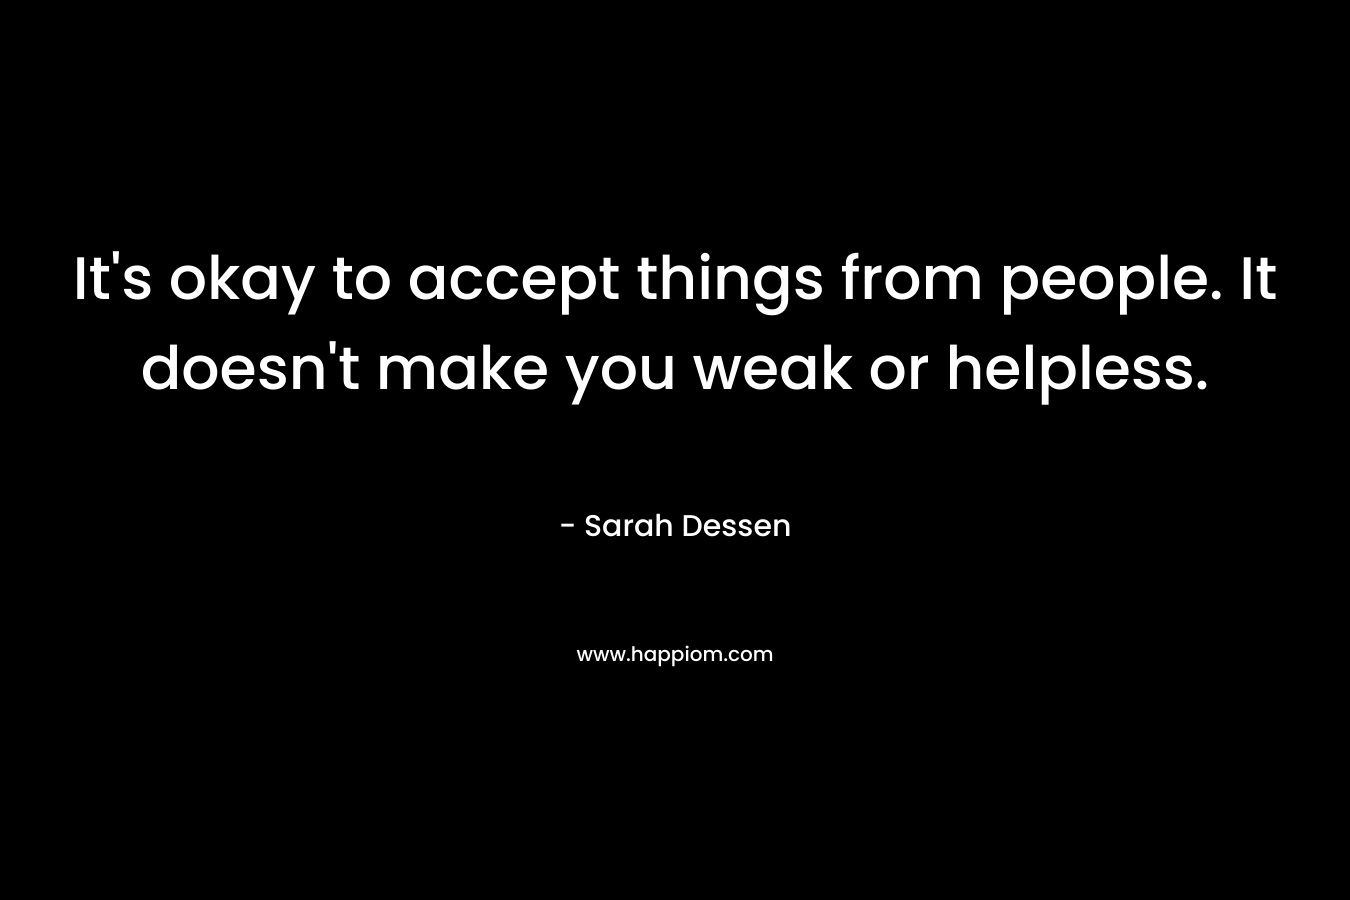 It's okay to accept things from people. It doesn't make you weak or helpless.